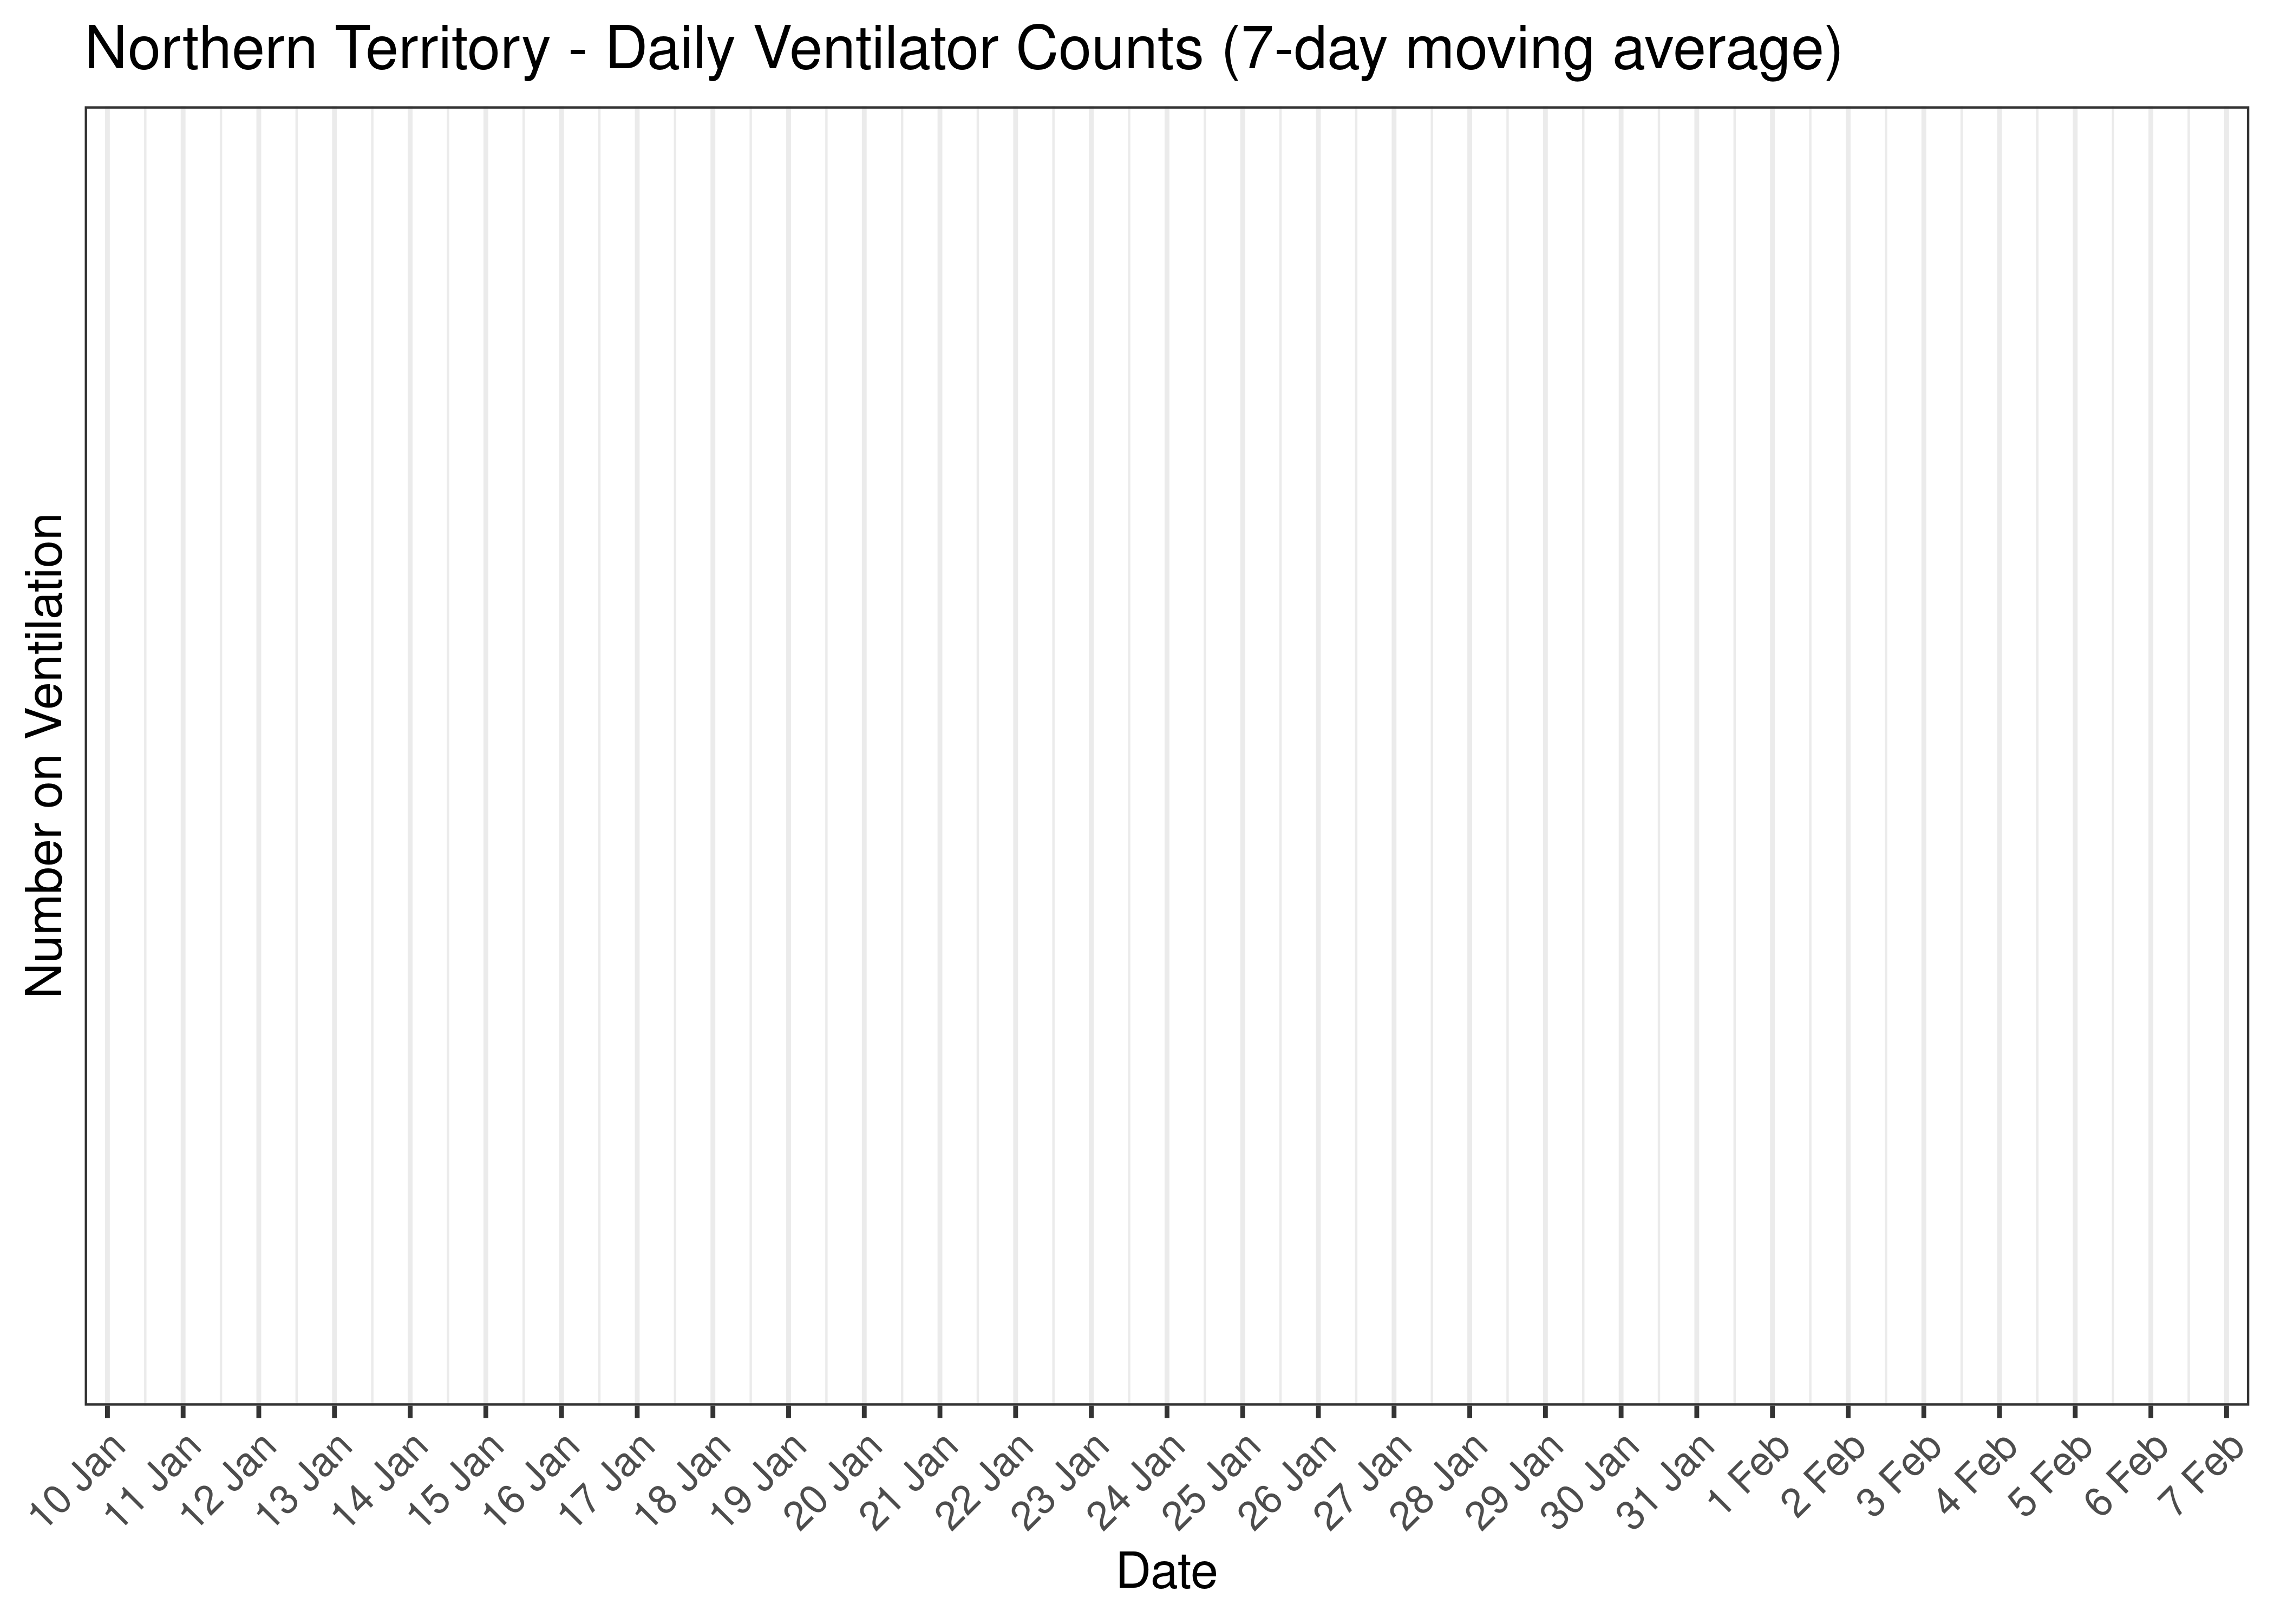 Northern Territory - Daily Hospital Counts for Last 30-days (7-day moving average)